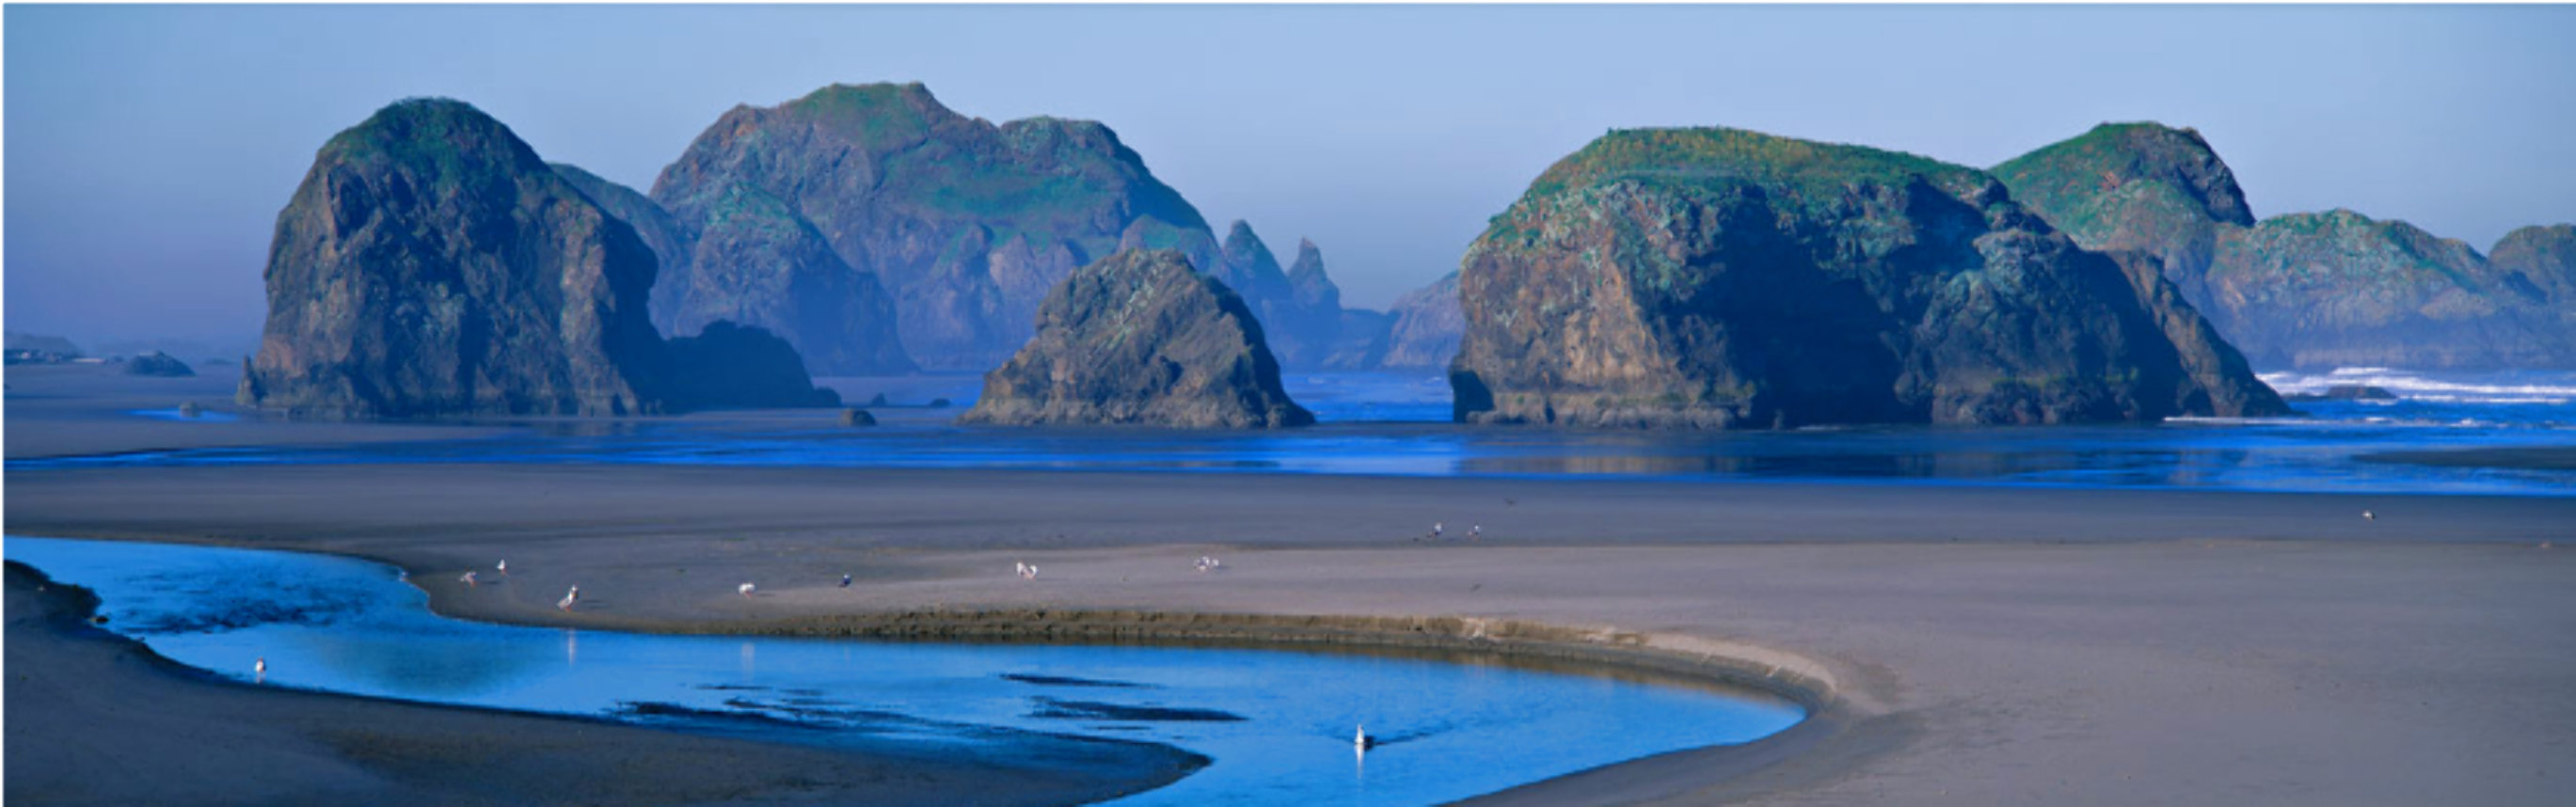 Keepers of the Ancient Coast (Oregon) Panorama by Thomas Mangelsen